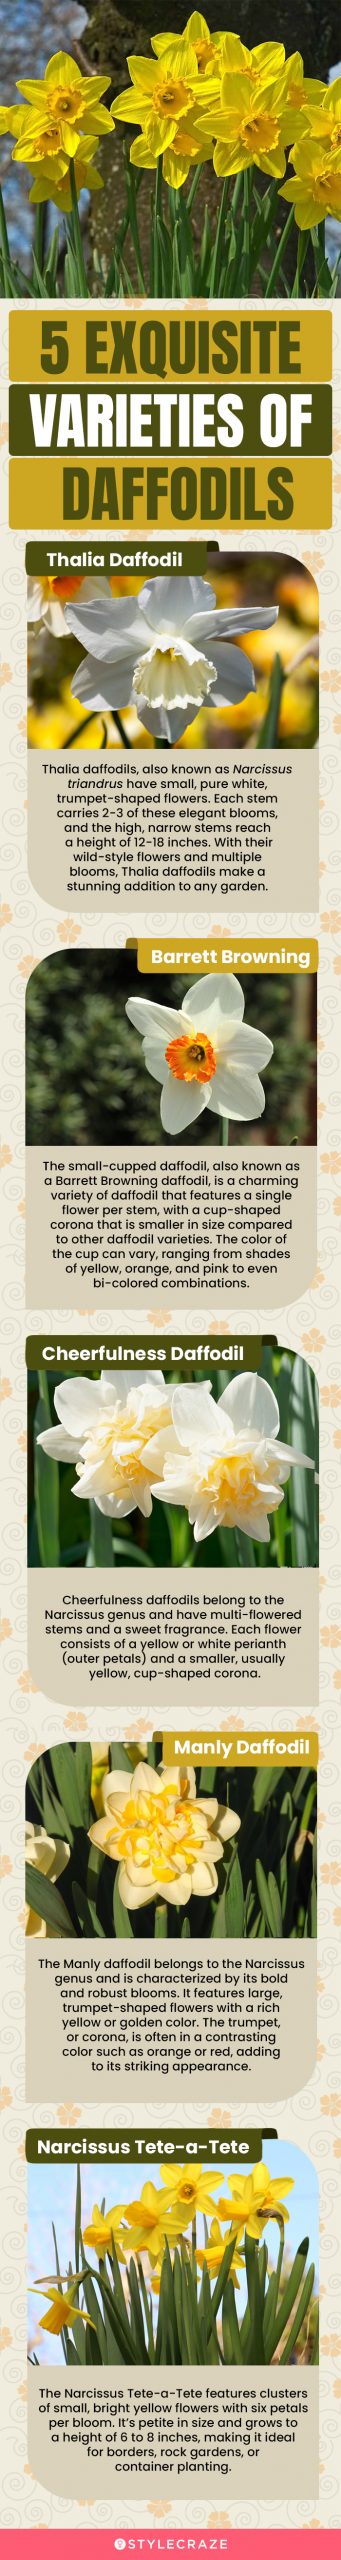 5 exquisite varieties of daffodils (infographic)